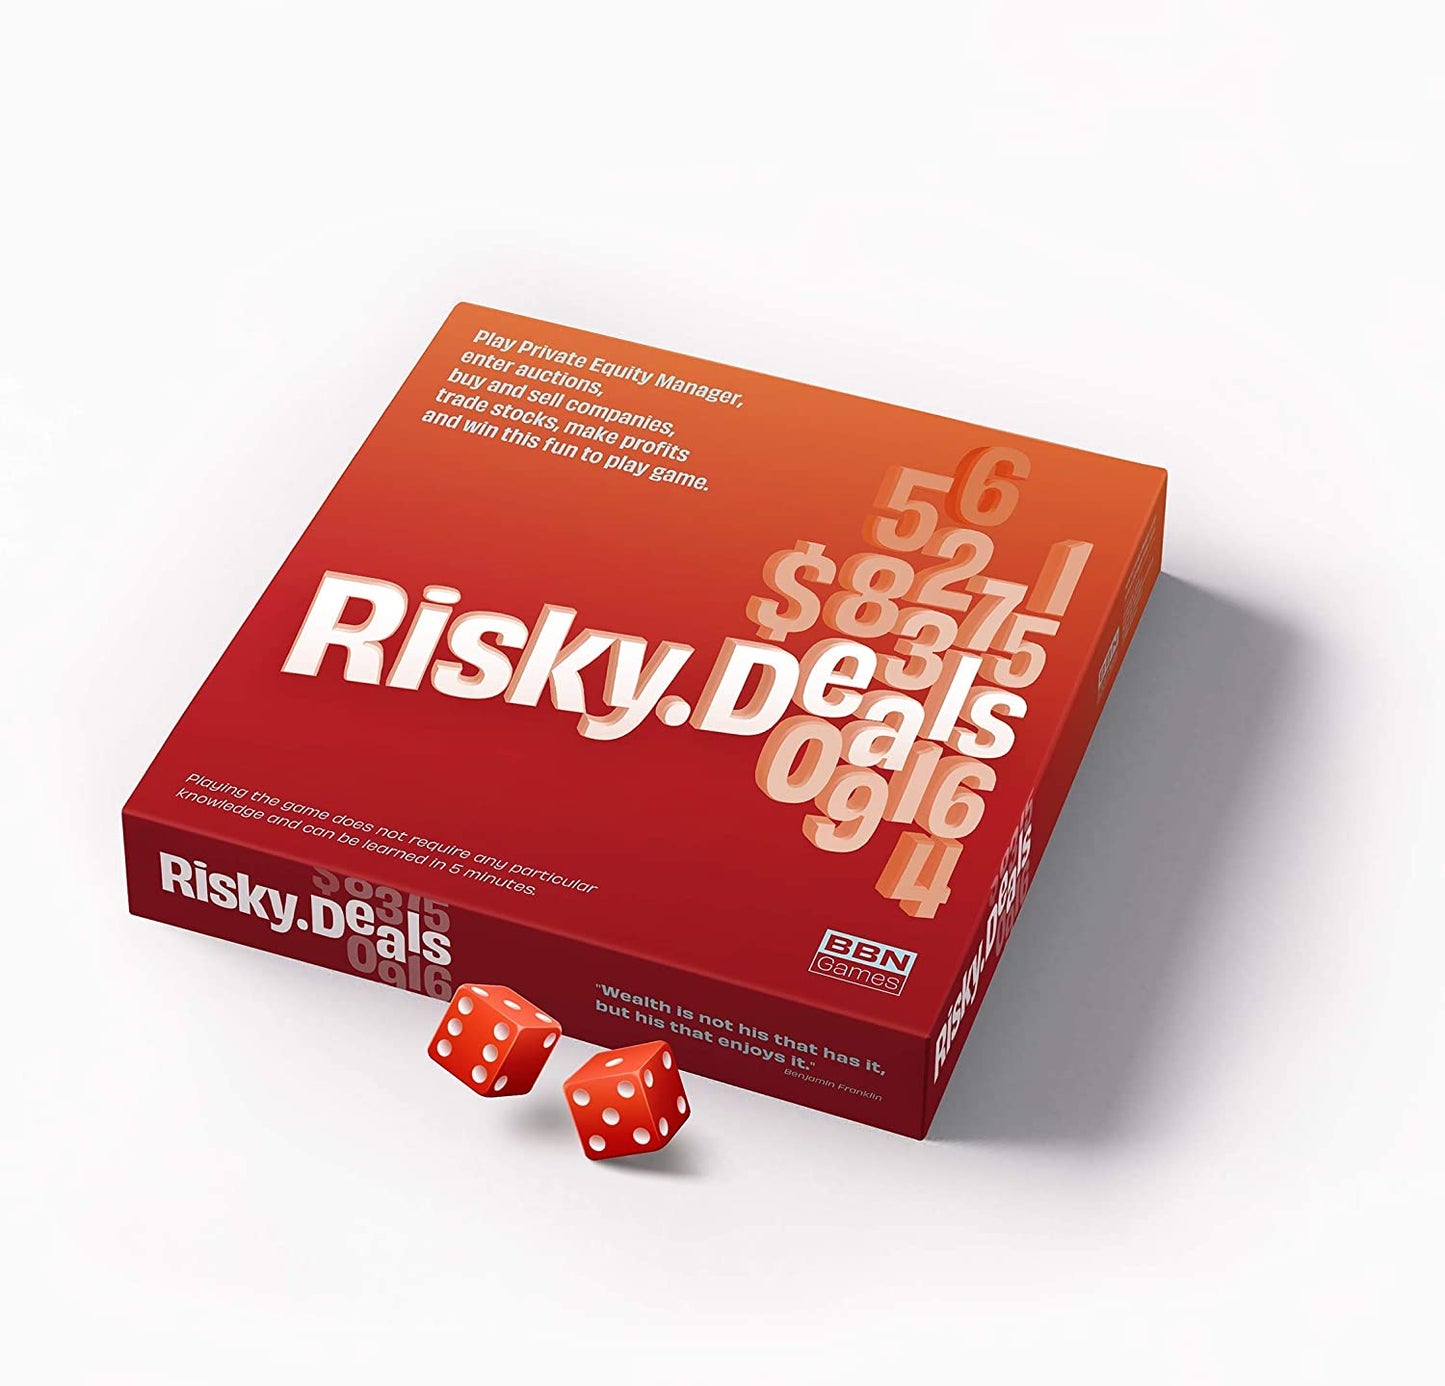 Risky Deals – The Stock Market Game - Bet Wisely, Roll The Dice and Get Rich – Fun Board Game for Adults and Family Night - Adrenaline and Fun